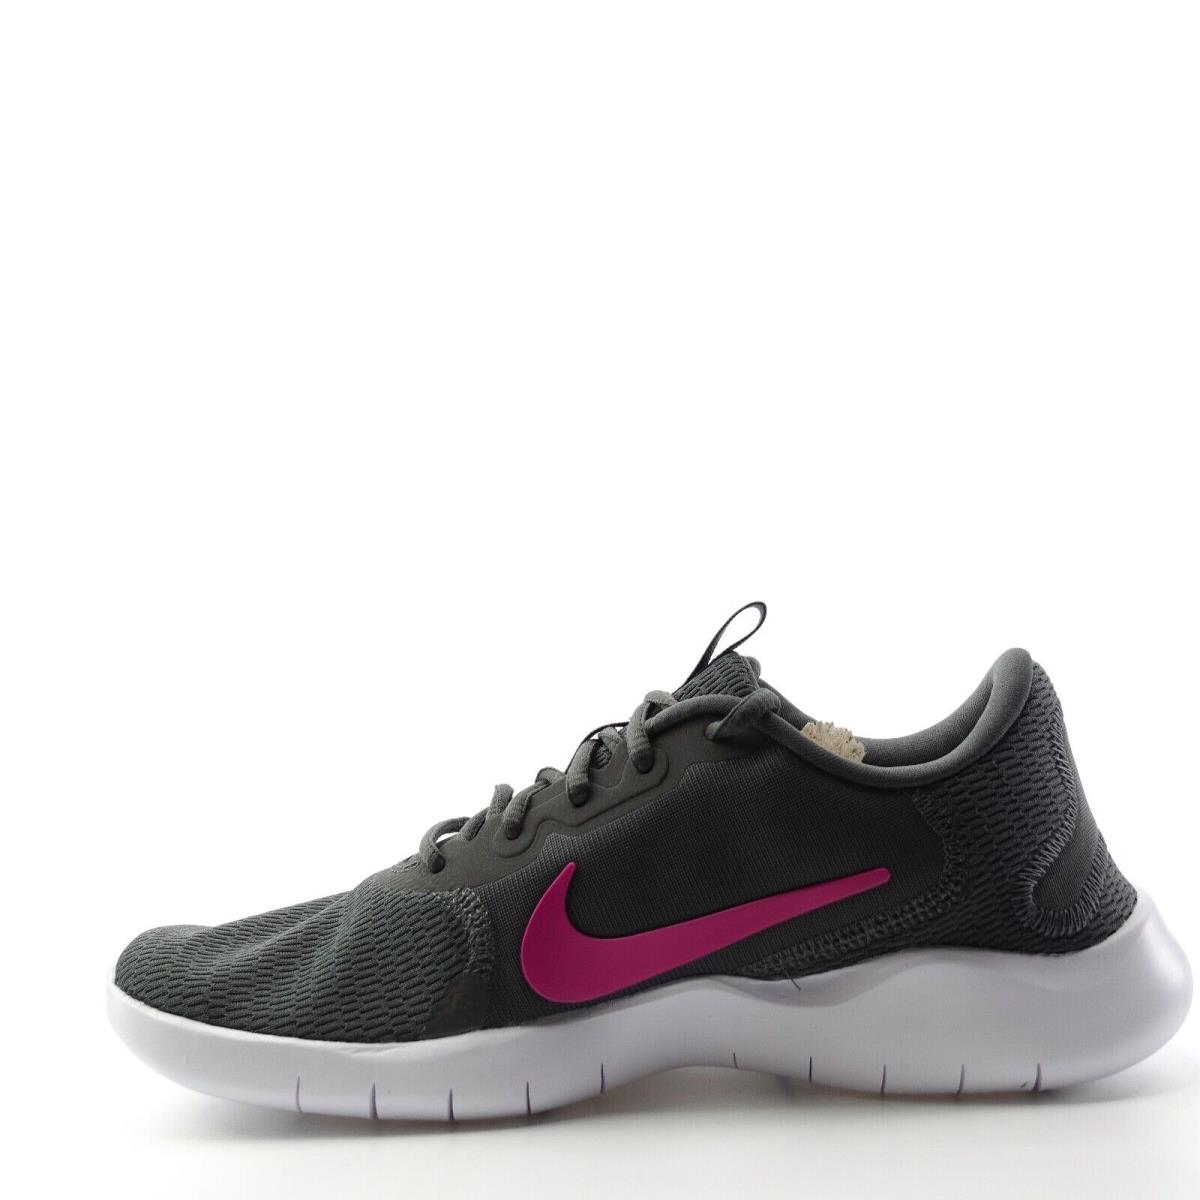 Nike Flex Experience RN 9 Shoes Pink 002 Womens Size 8 | 883212423283 - Nike shoes Flex Experience - Grey Pink White | SporTipTop